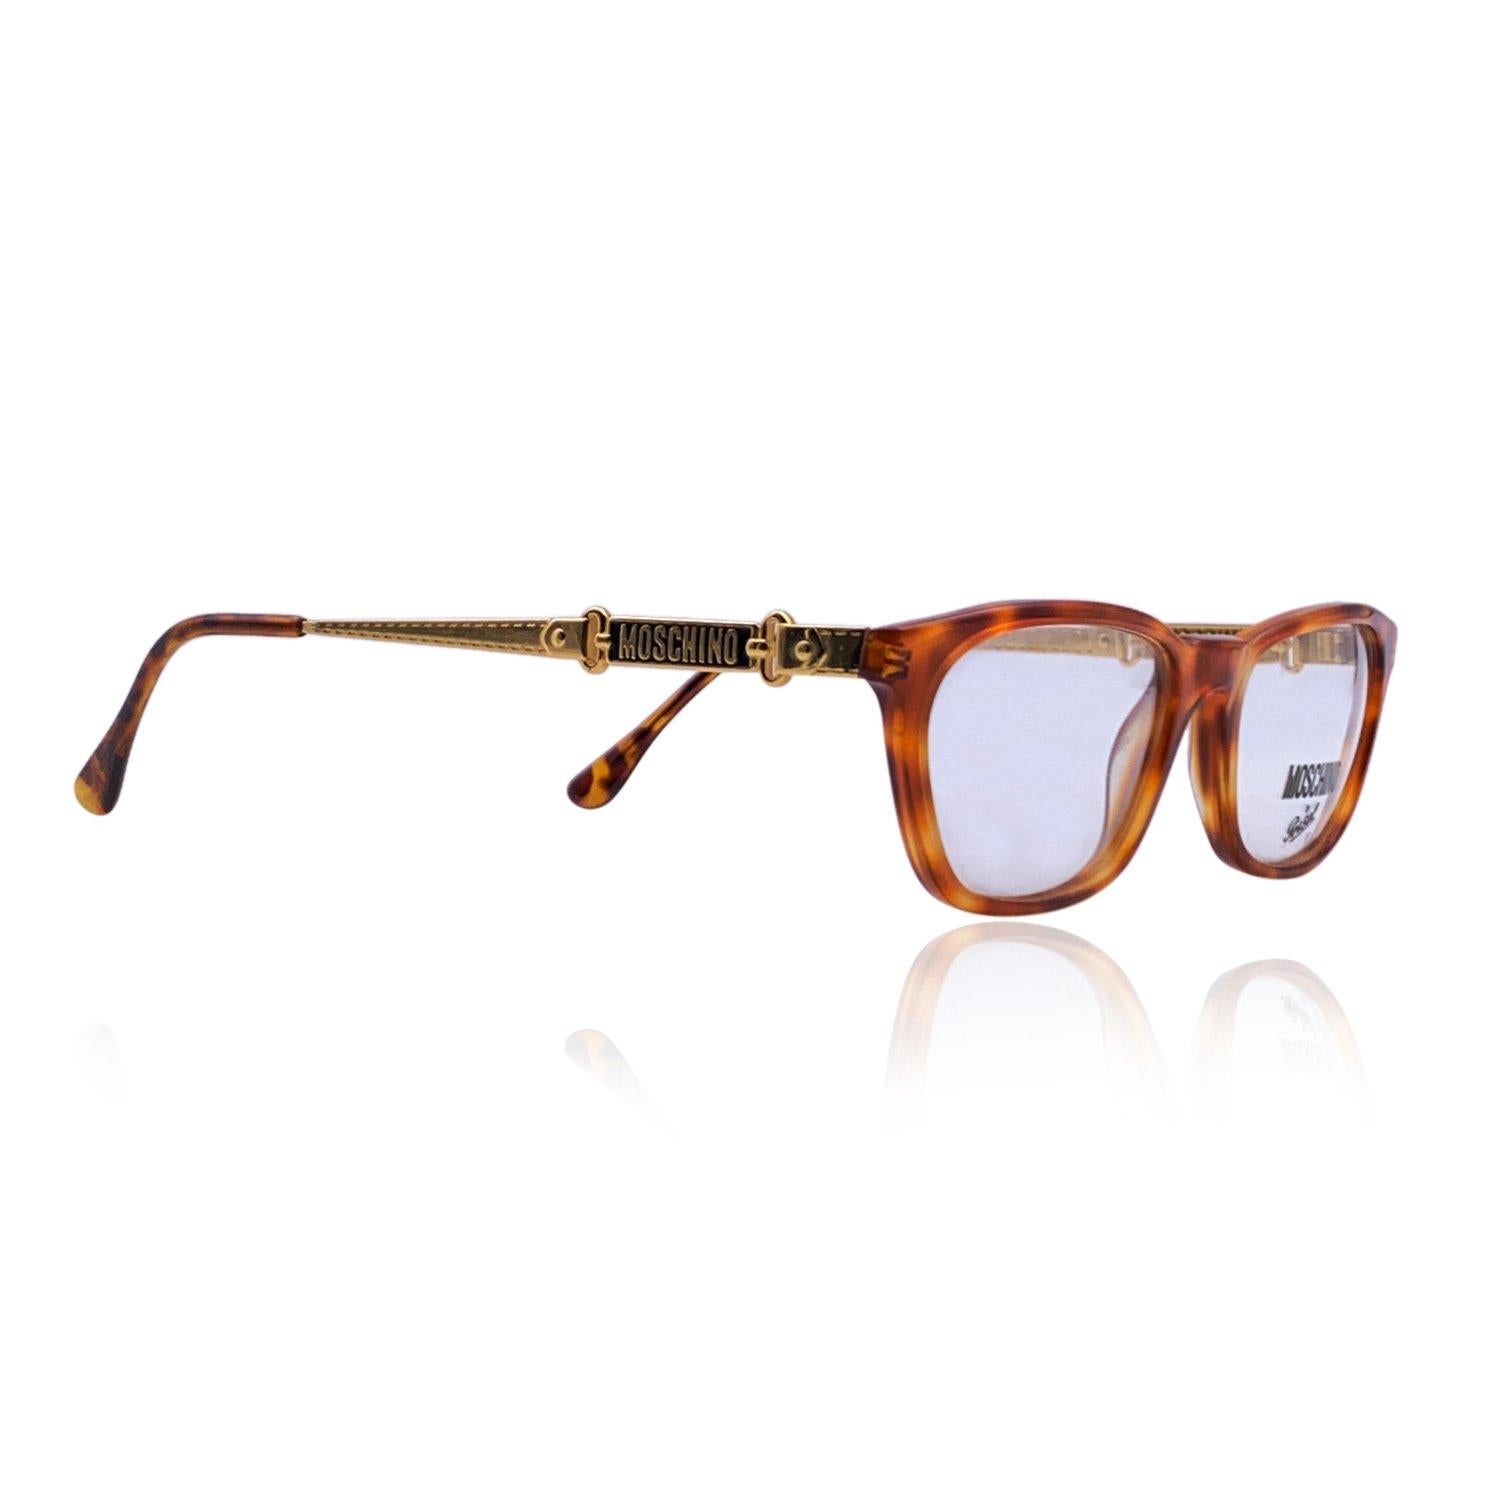 Brown acetate eyeglasses by Moschino by Persol. Rectangle design. Model: M55. 54/19 - 140 mm - logo on temples - clear demo lens, brown tortoise front with gold metal ear stems Details MATERIAL: Acetate COLOR: Brown MODEL: M55 GENDER: Woman COUNTRY